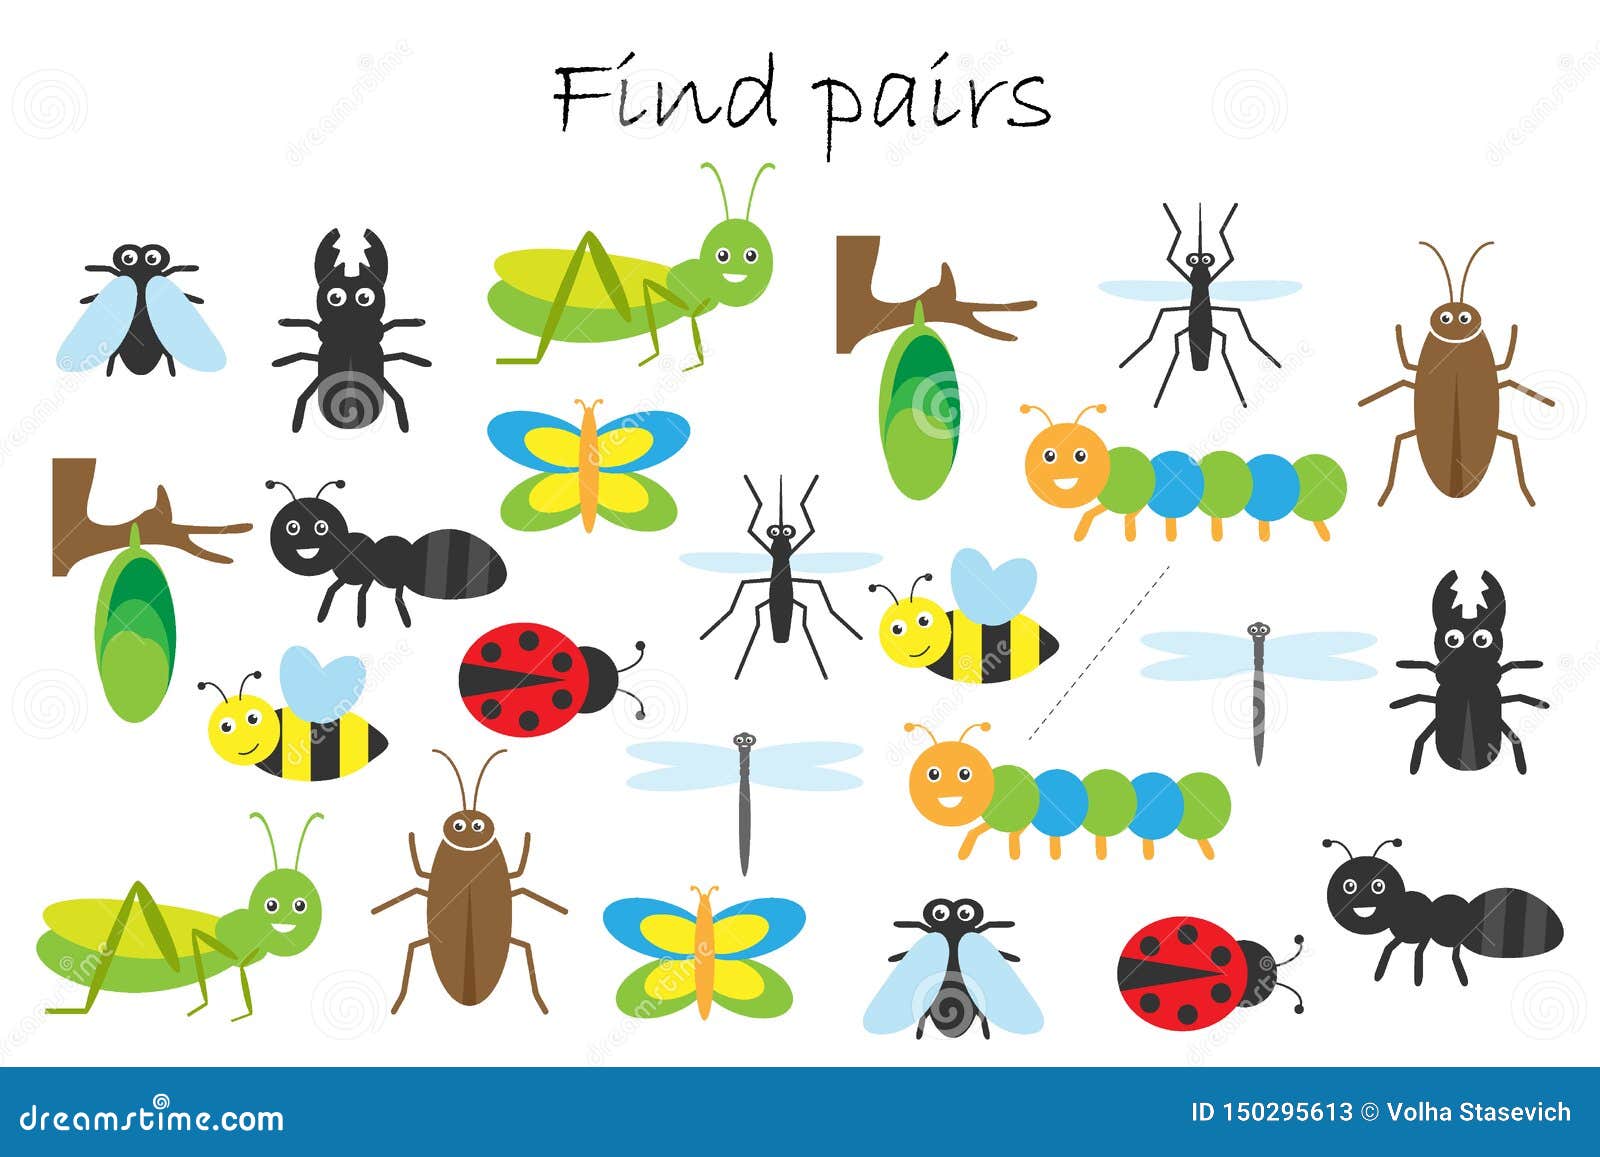 Find Pairs Of Identical Pictures Fun Education Game With Insects